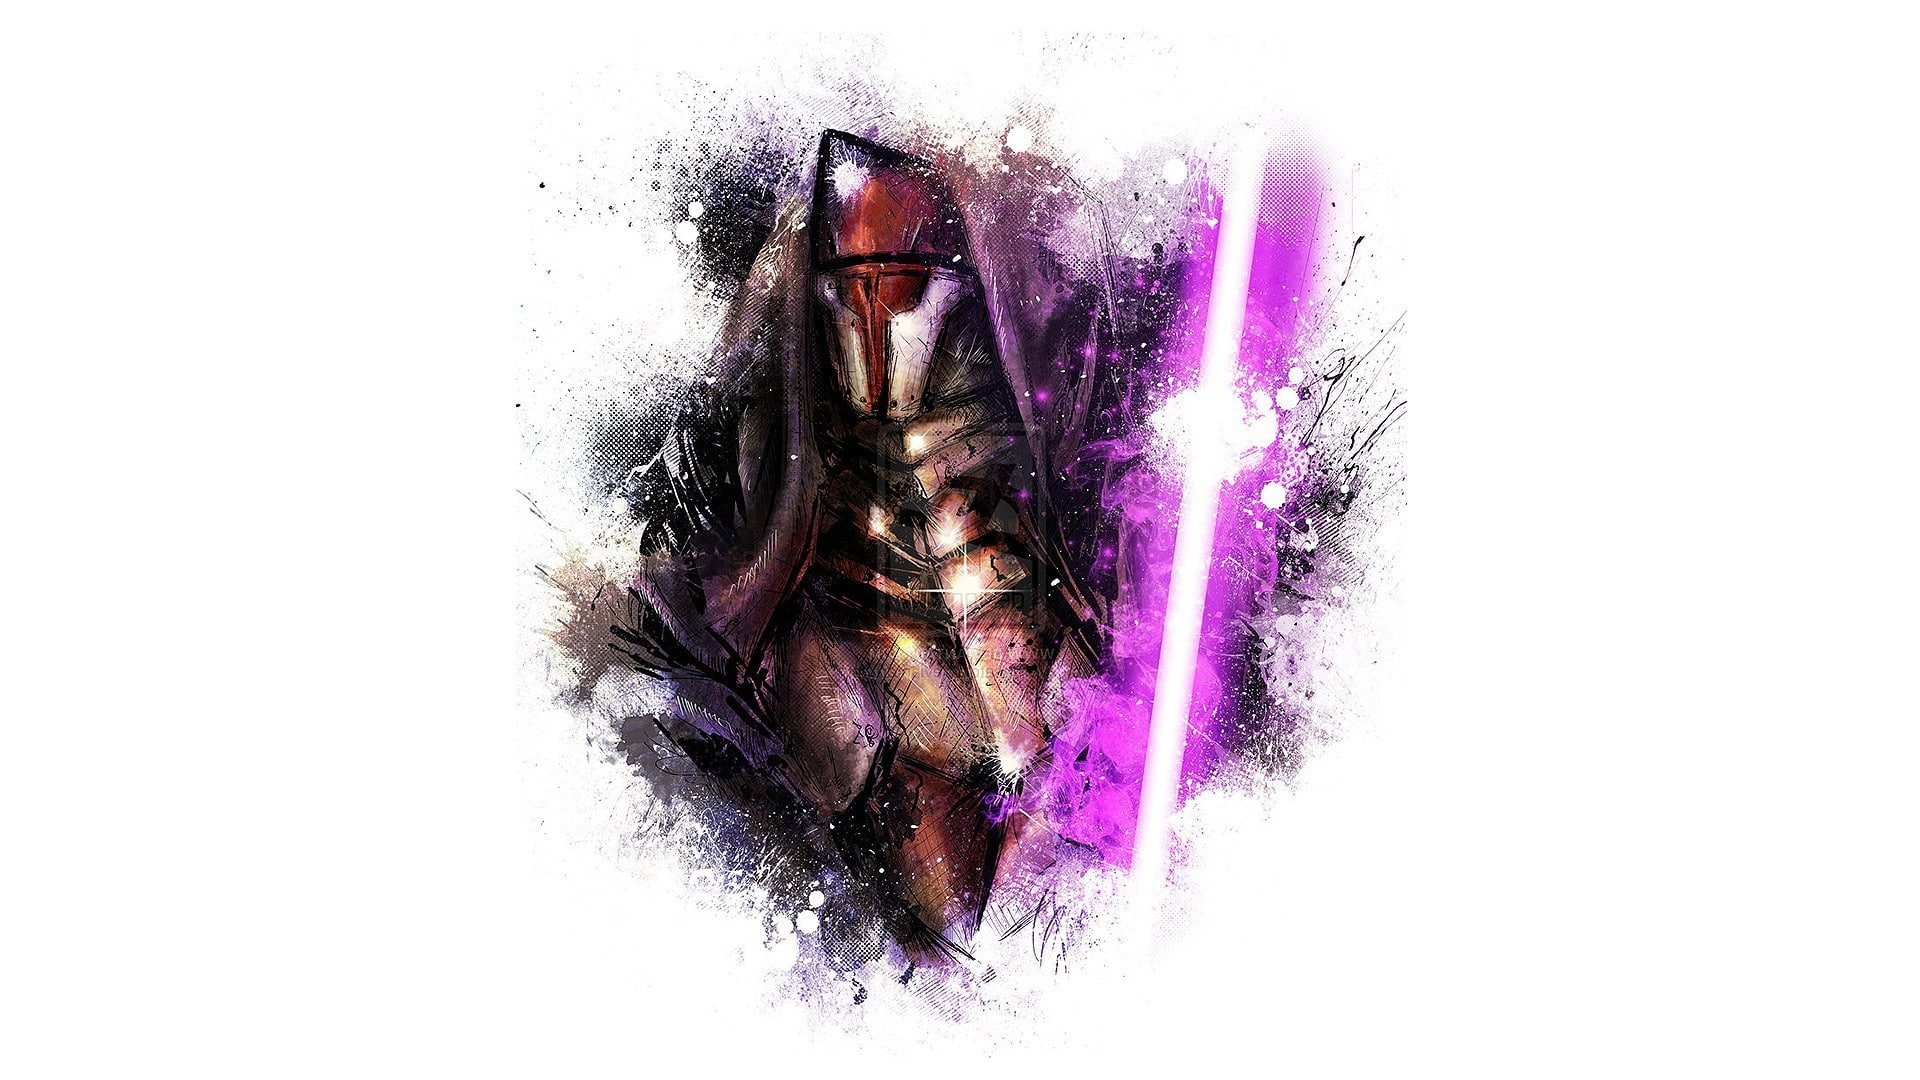 Stunning Star Wars Knights of the Old Republic Wallpaper